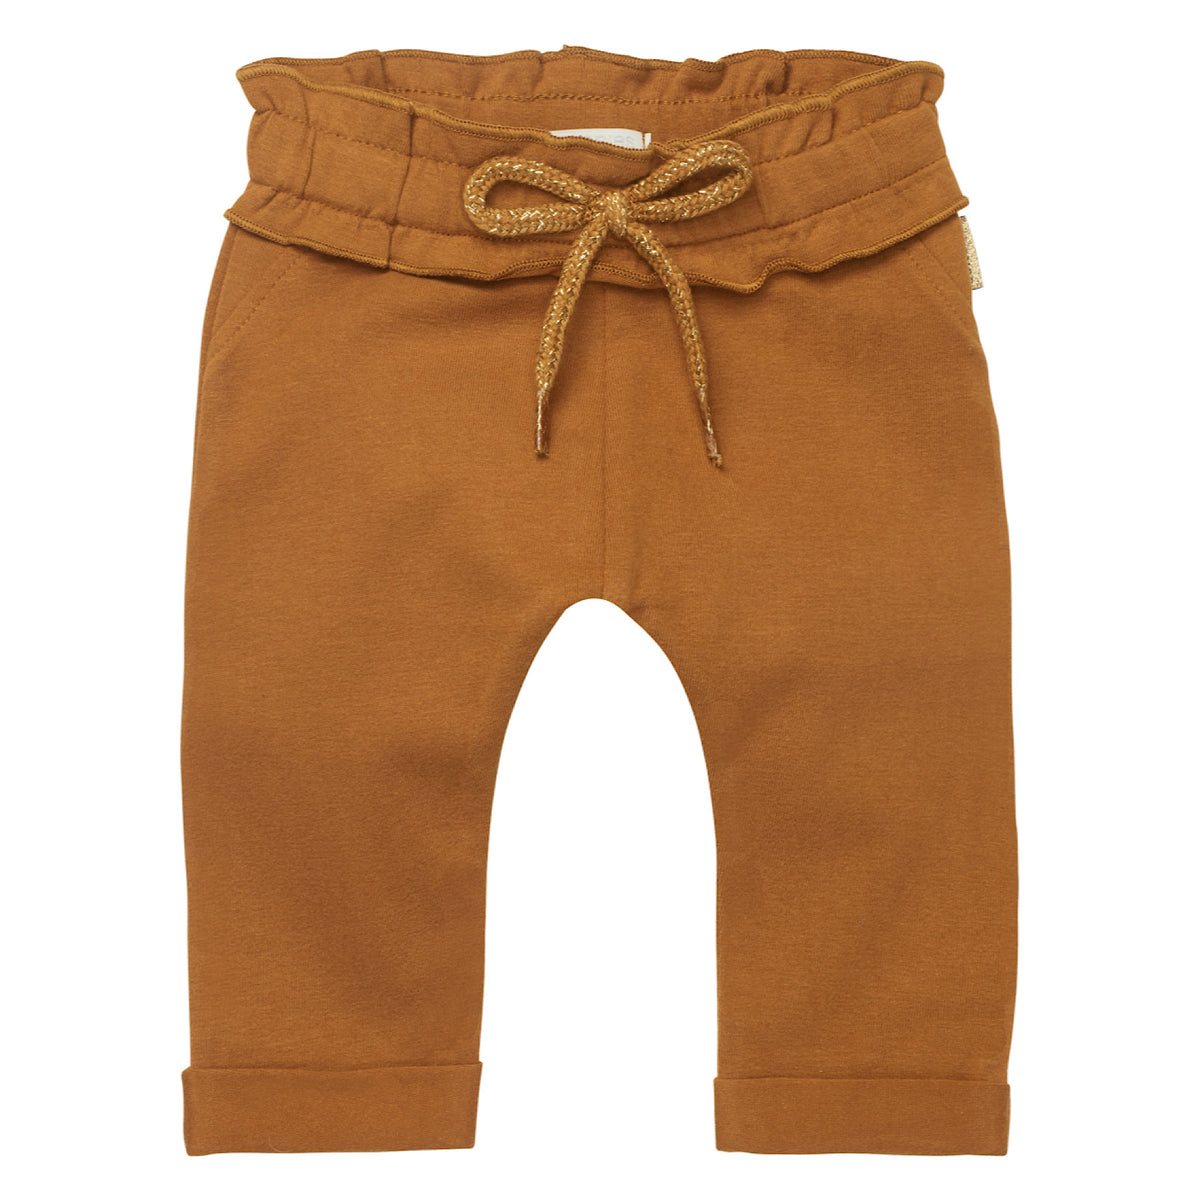 Cotton Trousers with Ruffle Detailing, Spice